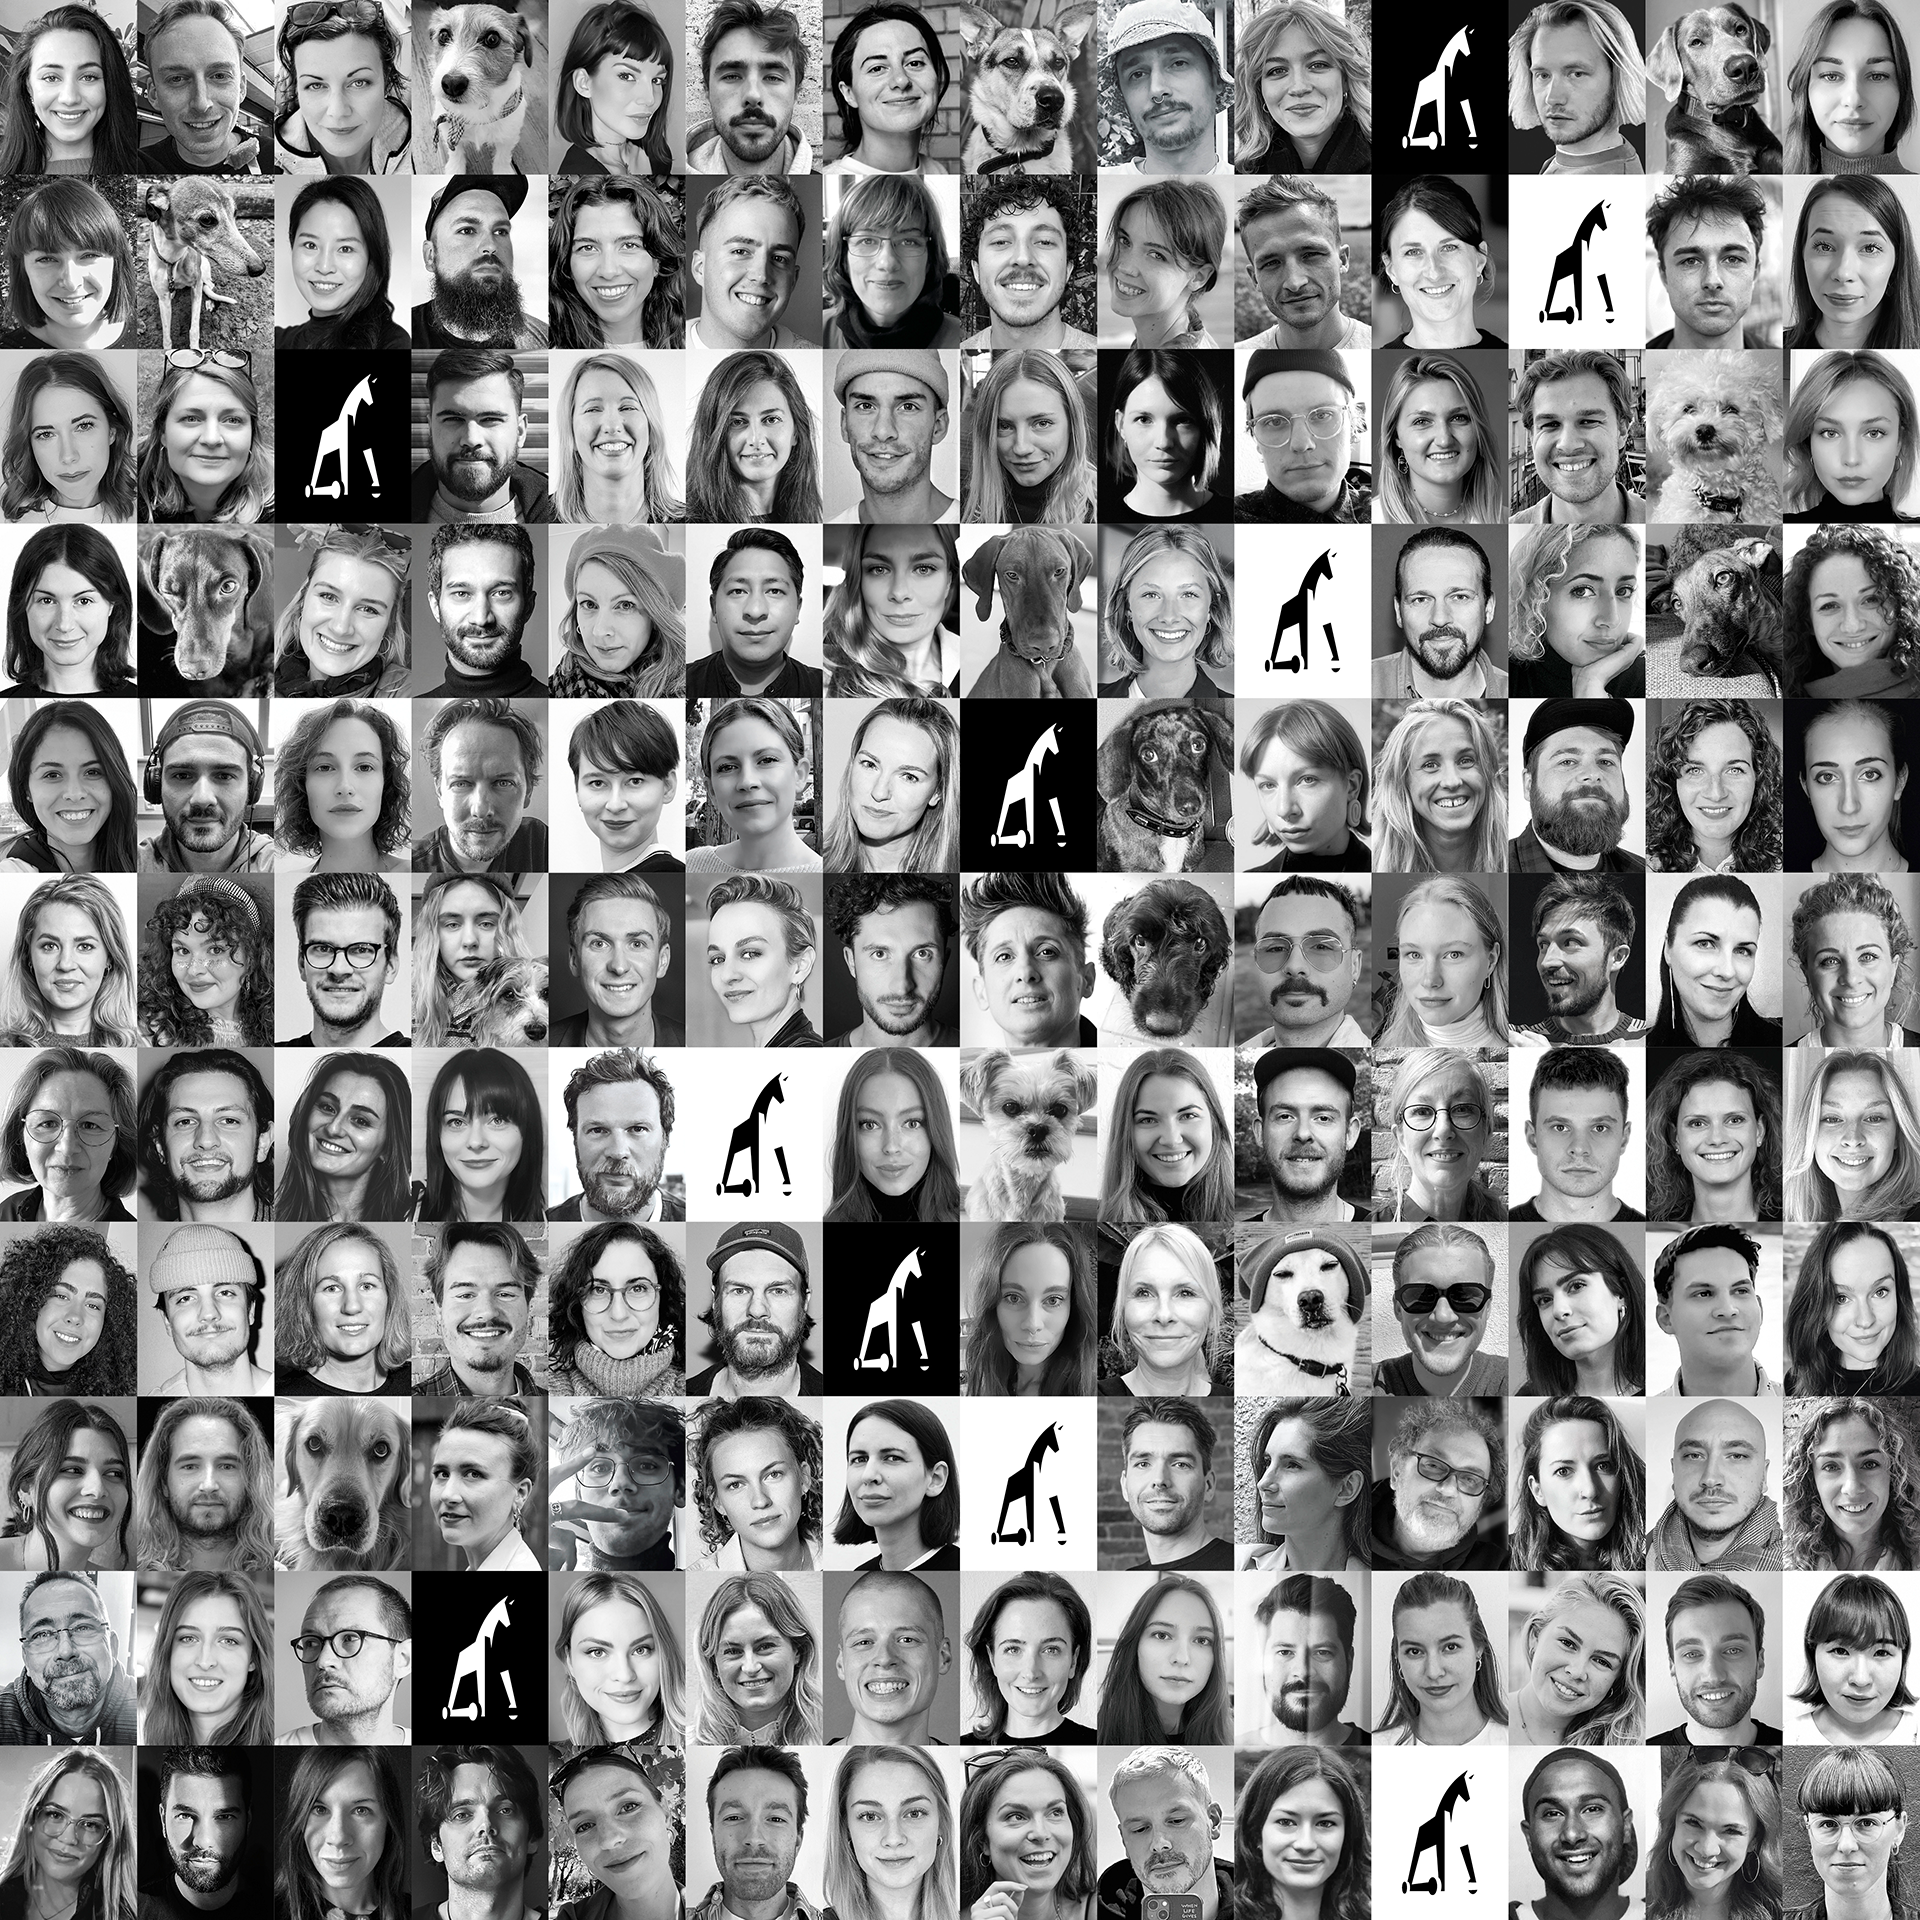 Image of several facial portraits of Jung von Matt SPREE employees in a black and white miniature tile look.